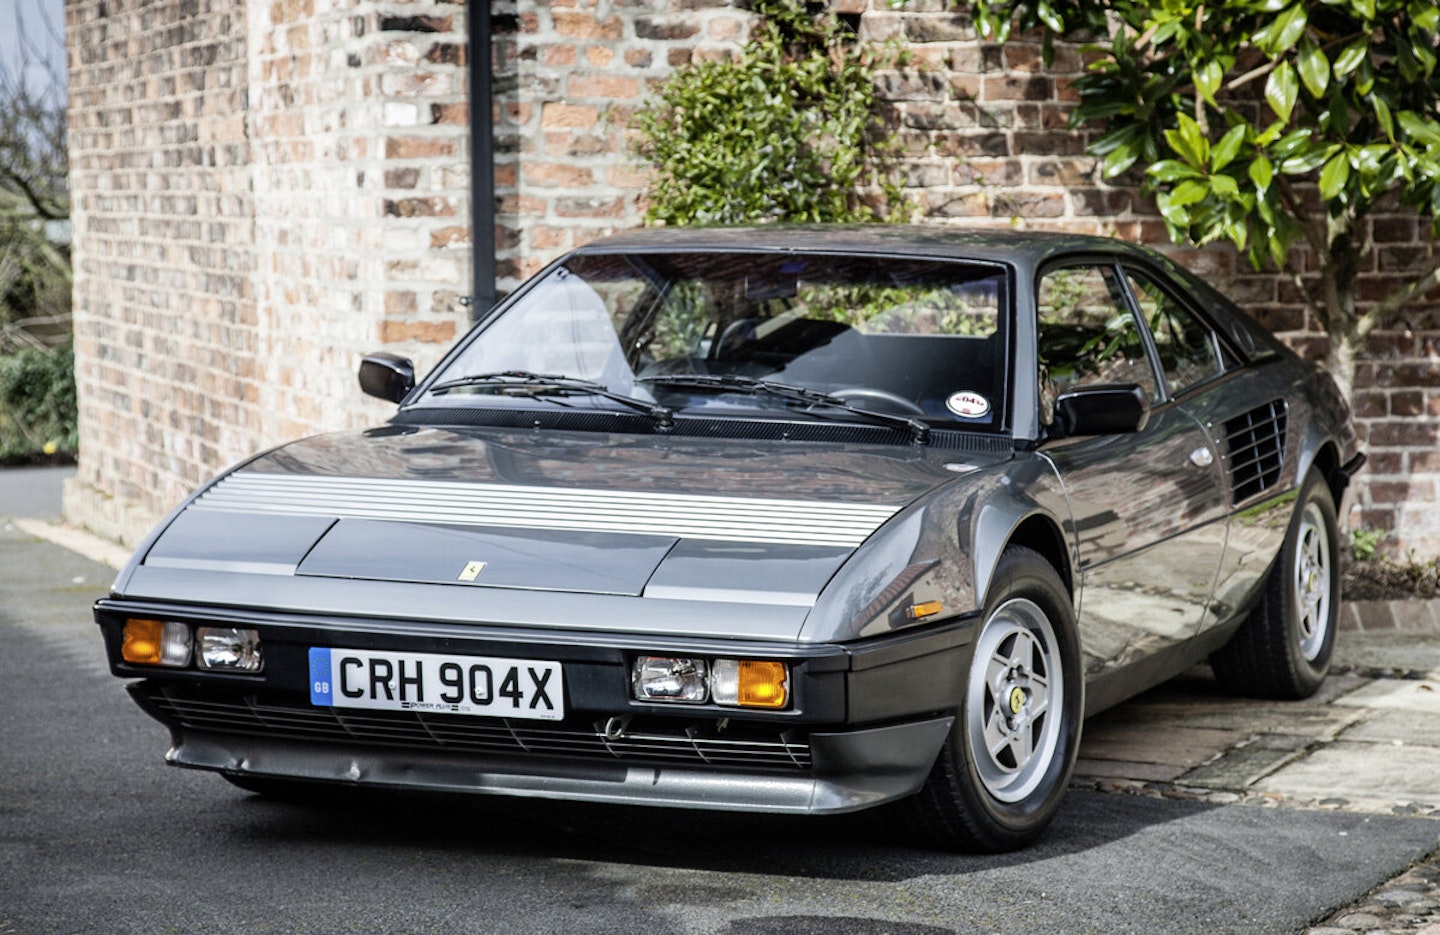 Ferrari Mondial was bought under pressure from Chris Evans – which is as good an excuse as any